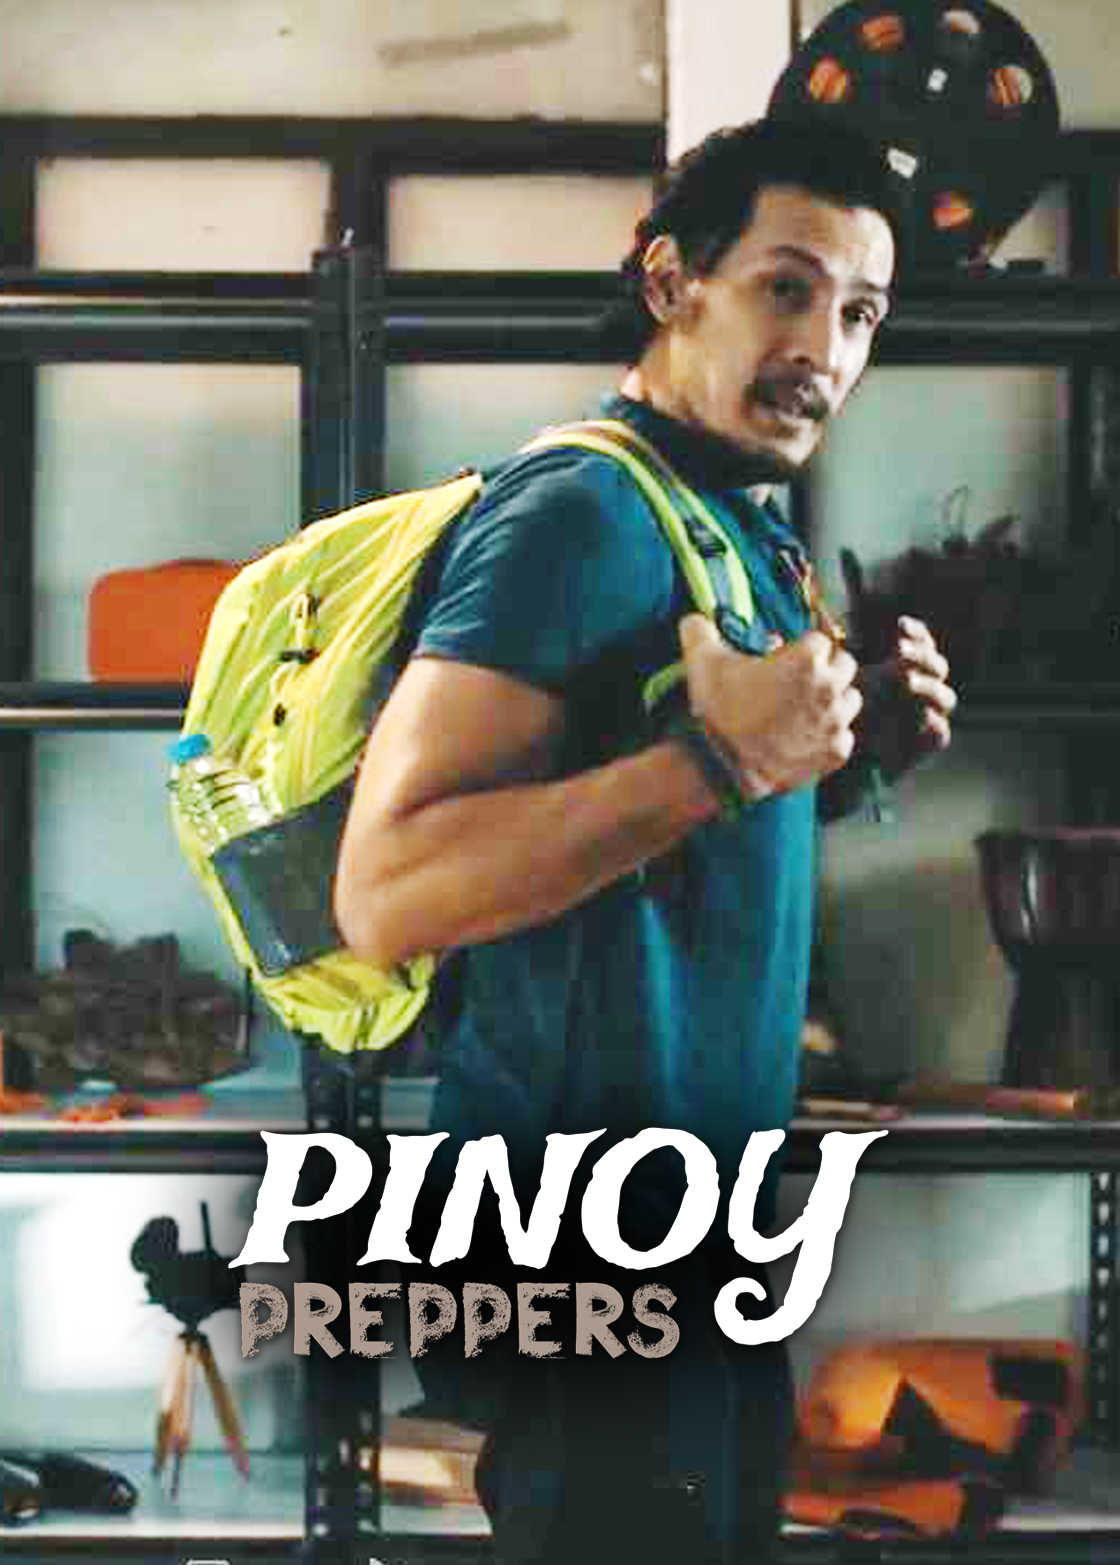 Christian Vazquez shares how to become a Pinoy prepper in TrueID's new  survival series